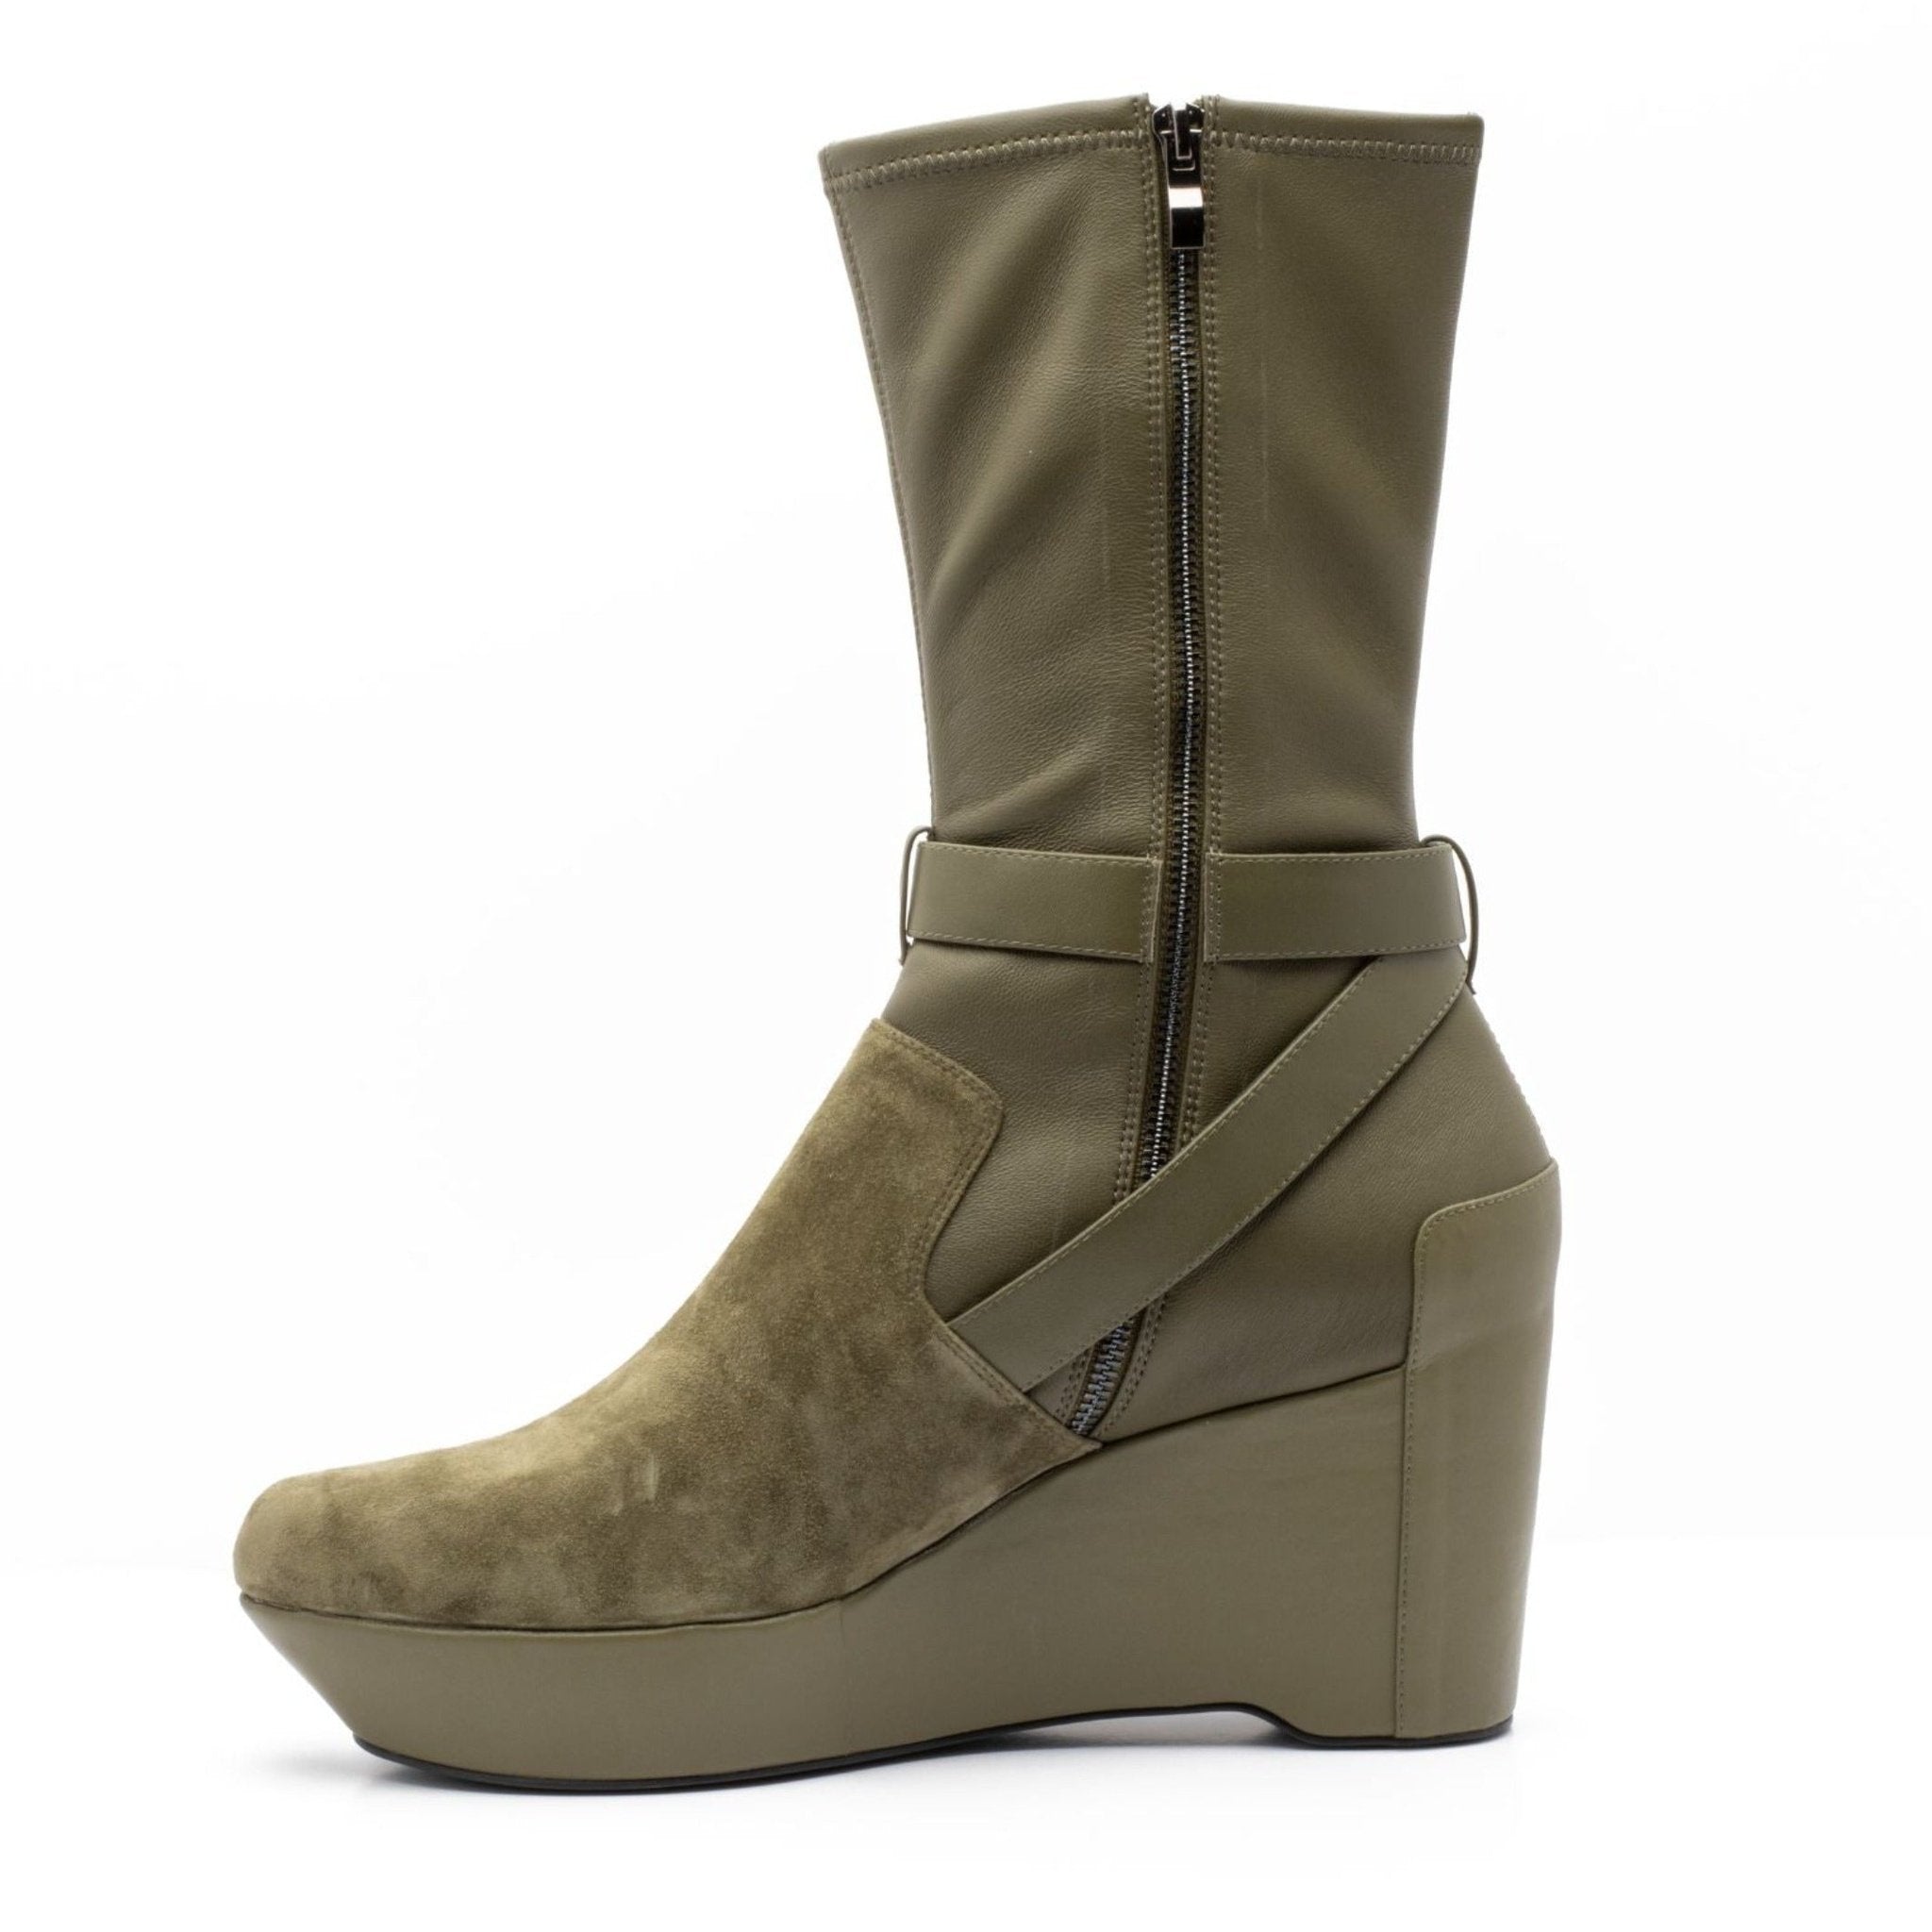 green suede leather wedge boot large sizes